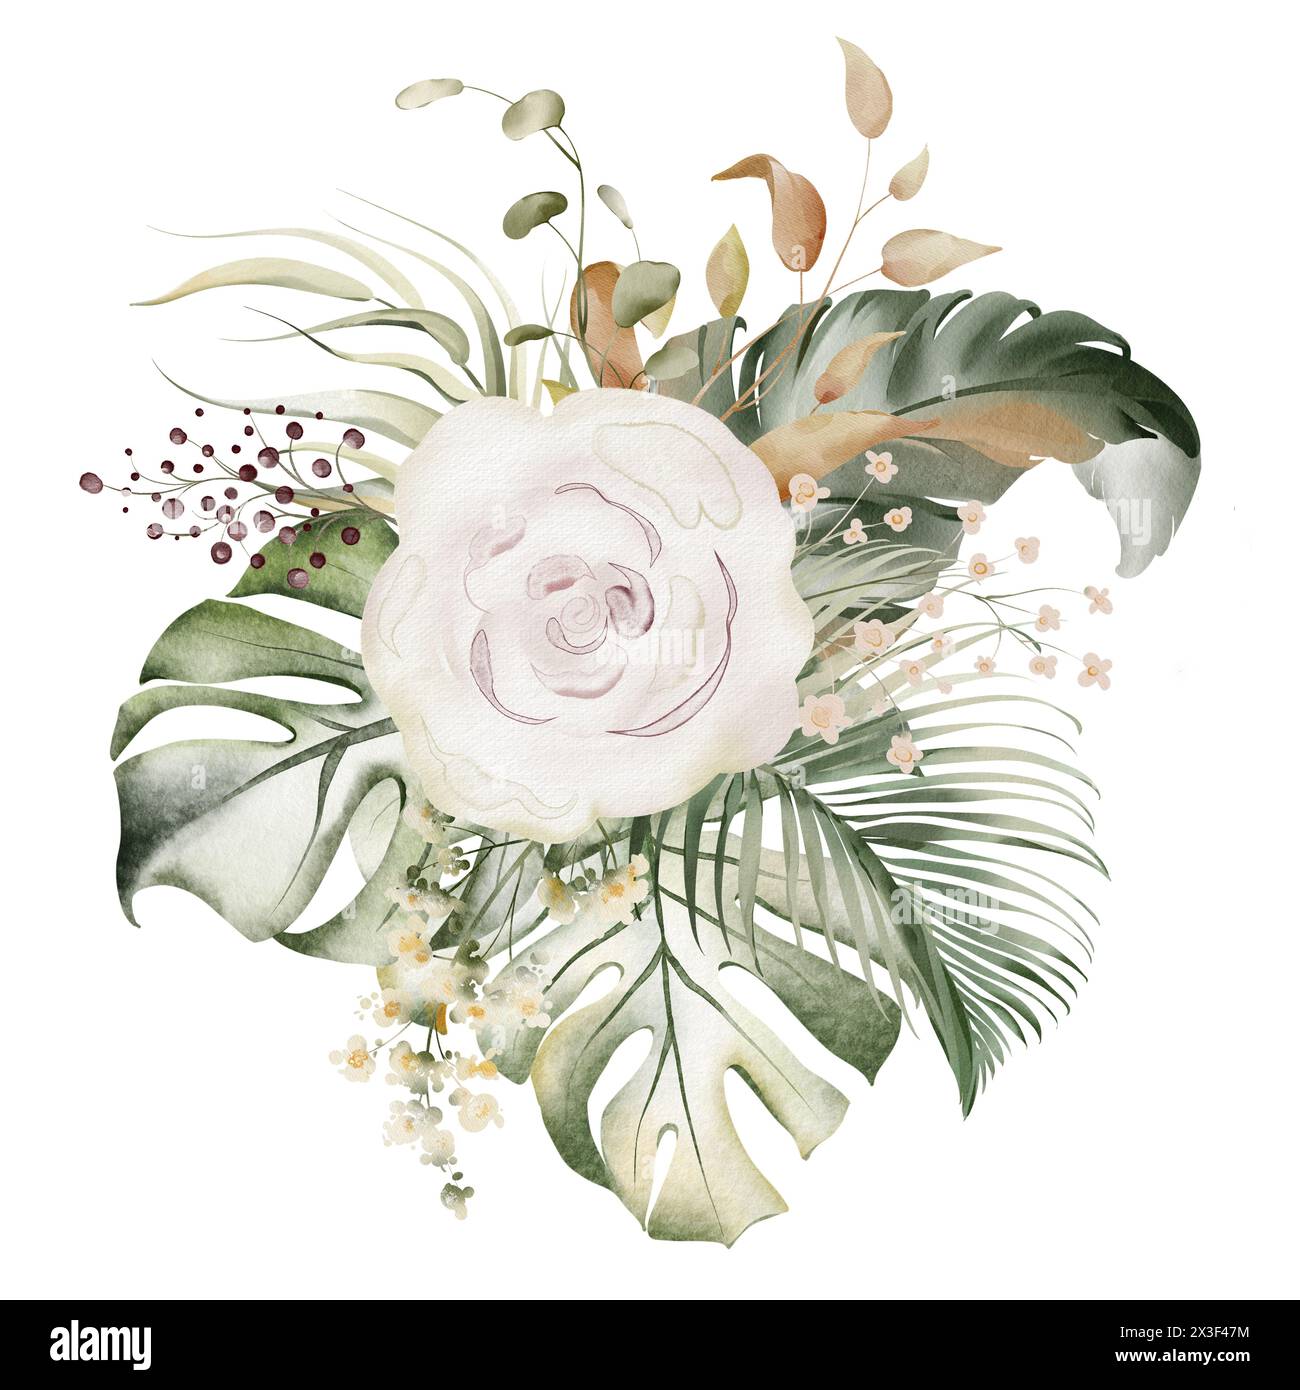 Botanical composition of watercolor roses. Stock Photo